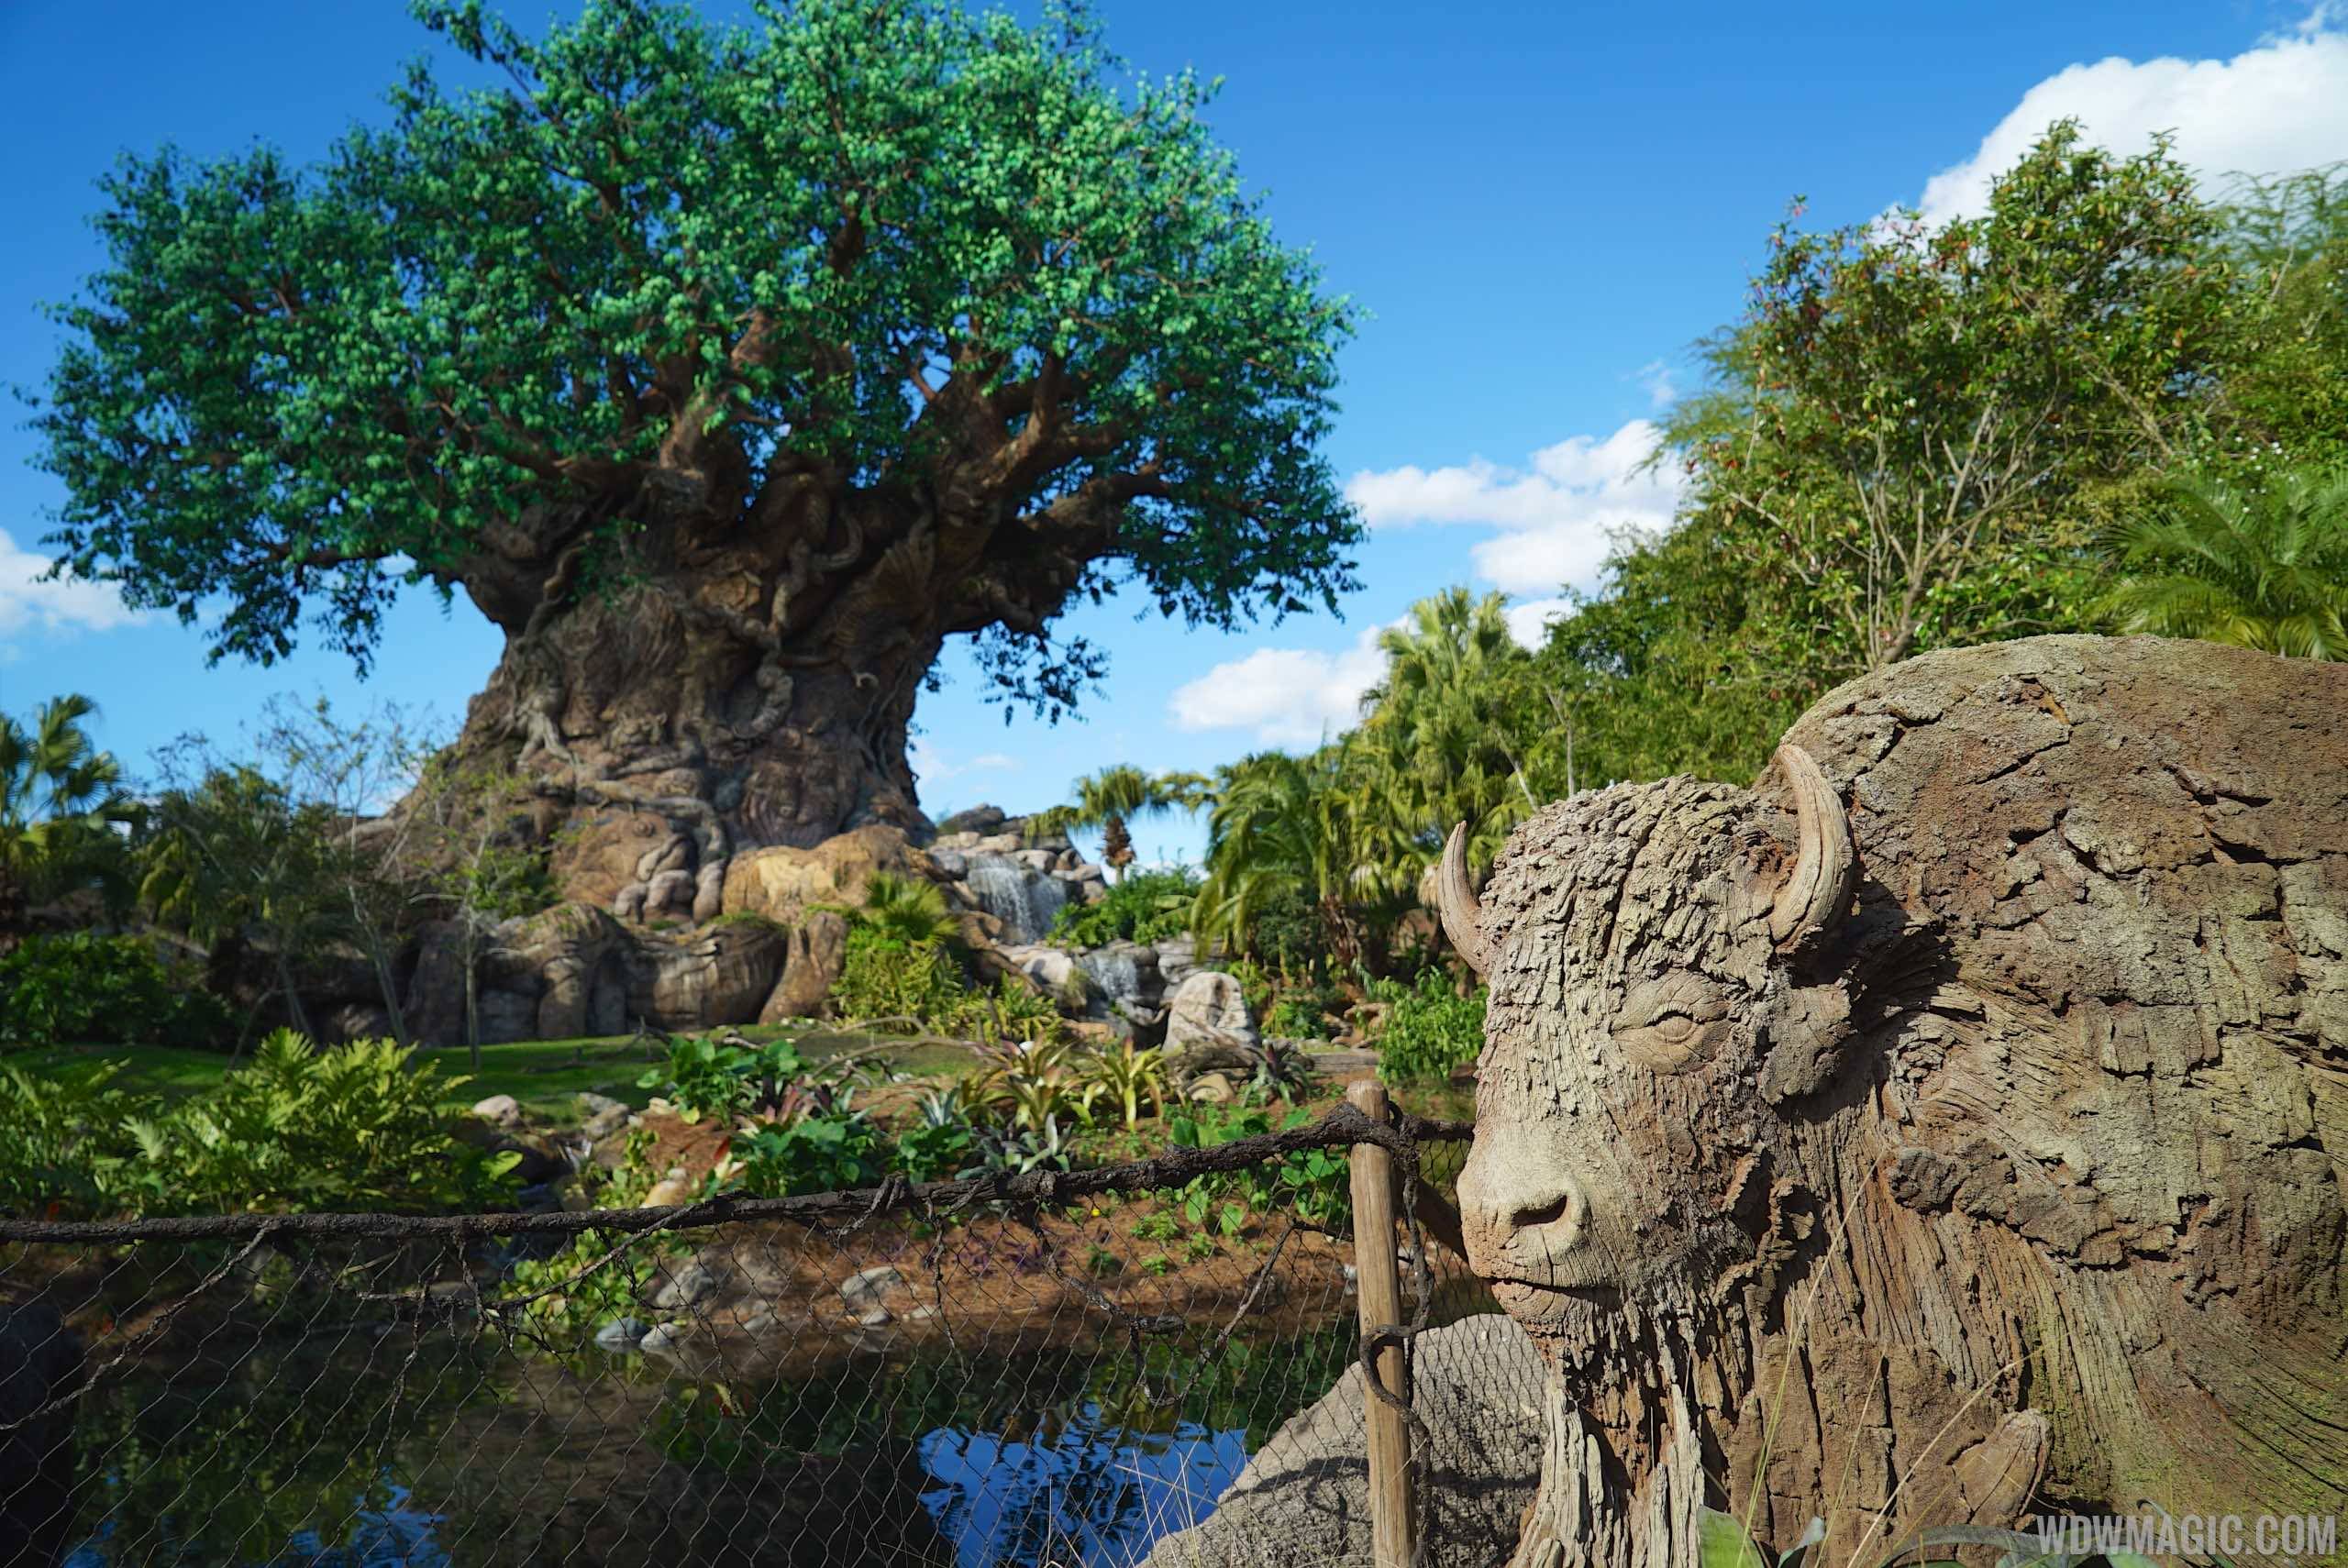 PHOTOS and VIDEO - New roots expand the Tree of Life at Disney's Animal Kingdom